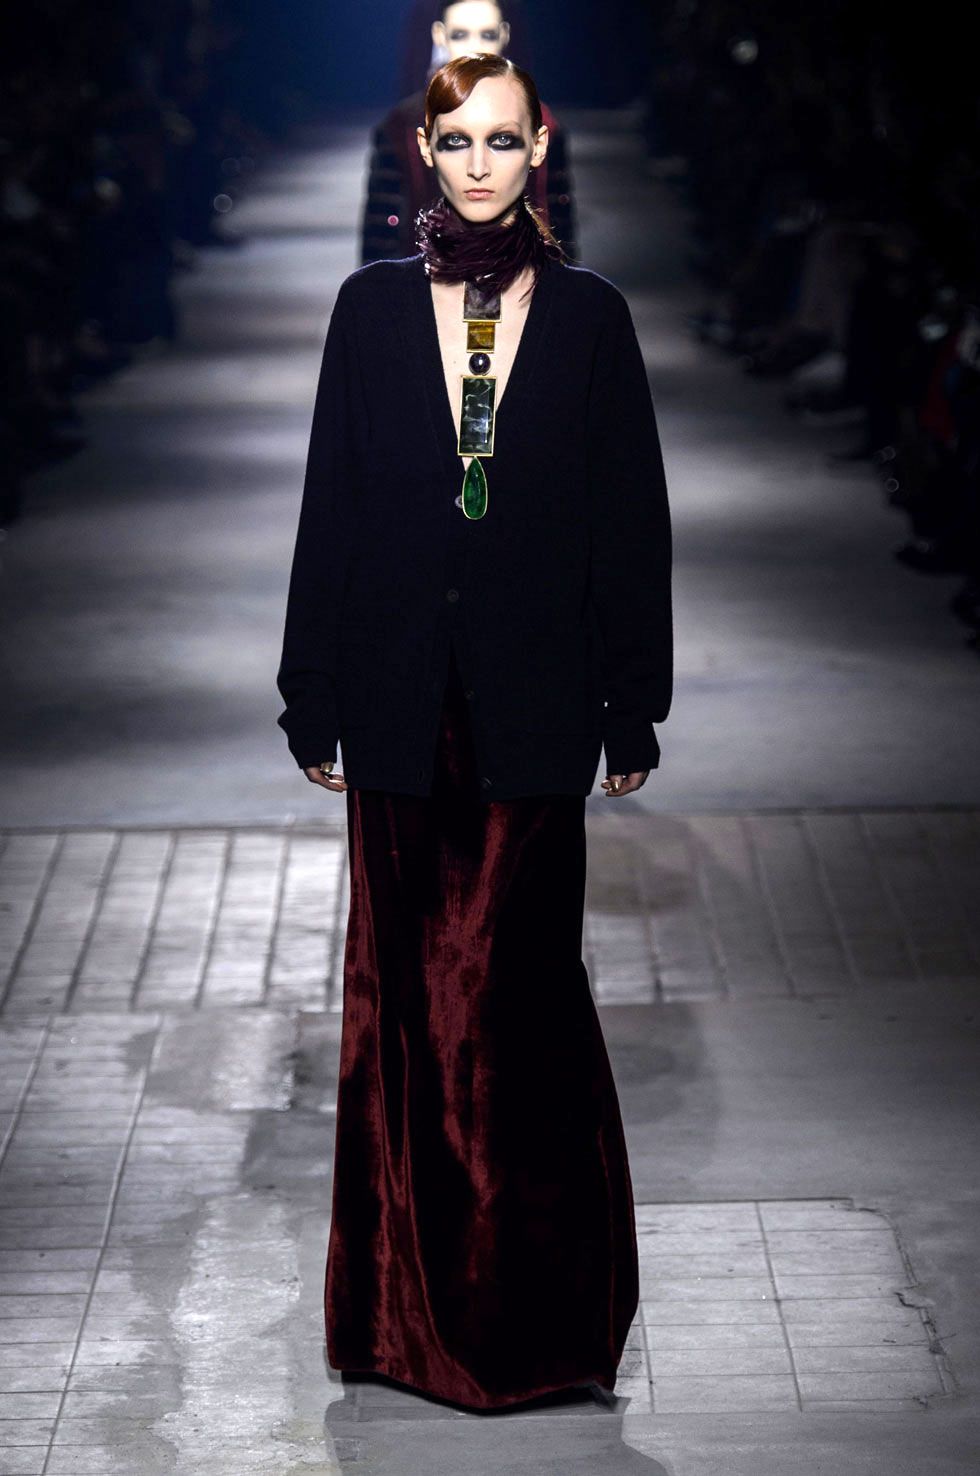 All the Looks From the Dries Van Noten Fall 2016 Ready-to-Wear Show